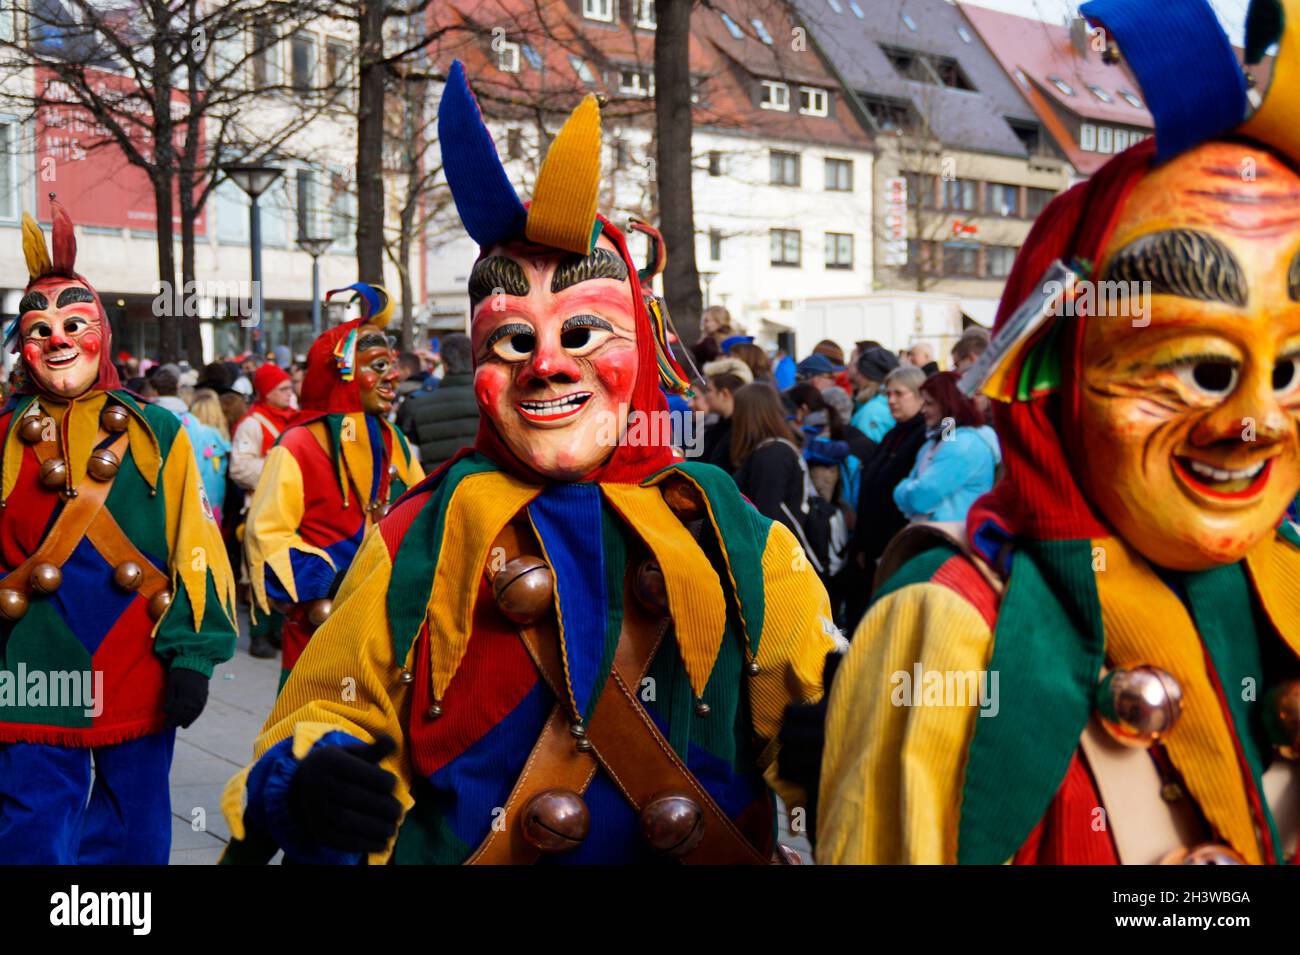 people dressed up in funny clothes and masks celebrating traditional German Shrovetide carnival called Fasching or Narrensprung in Ulm, Germany Stock Photo